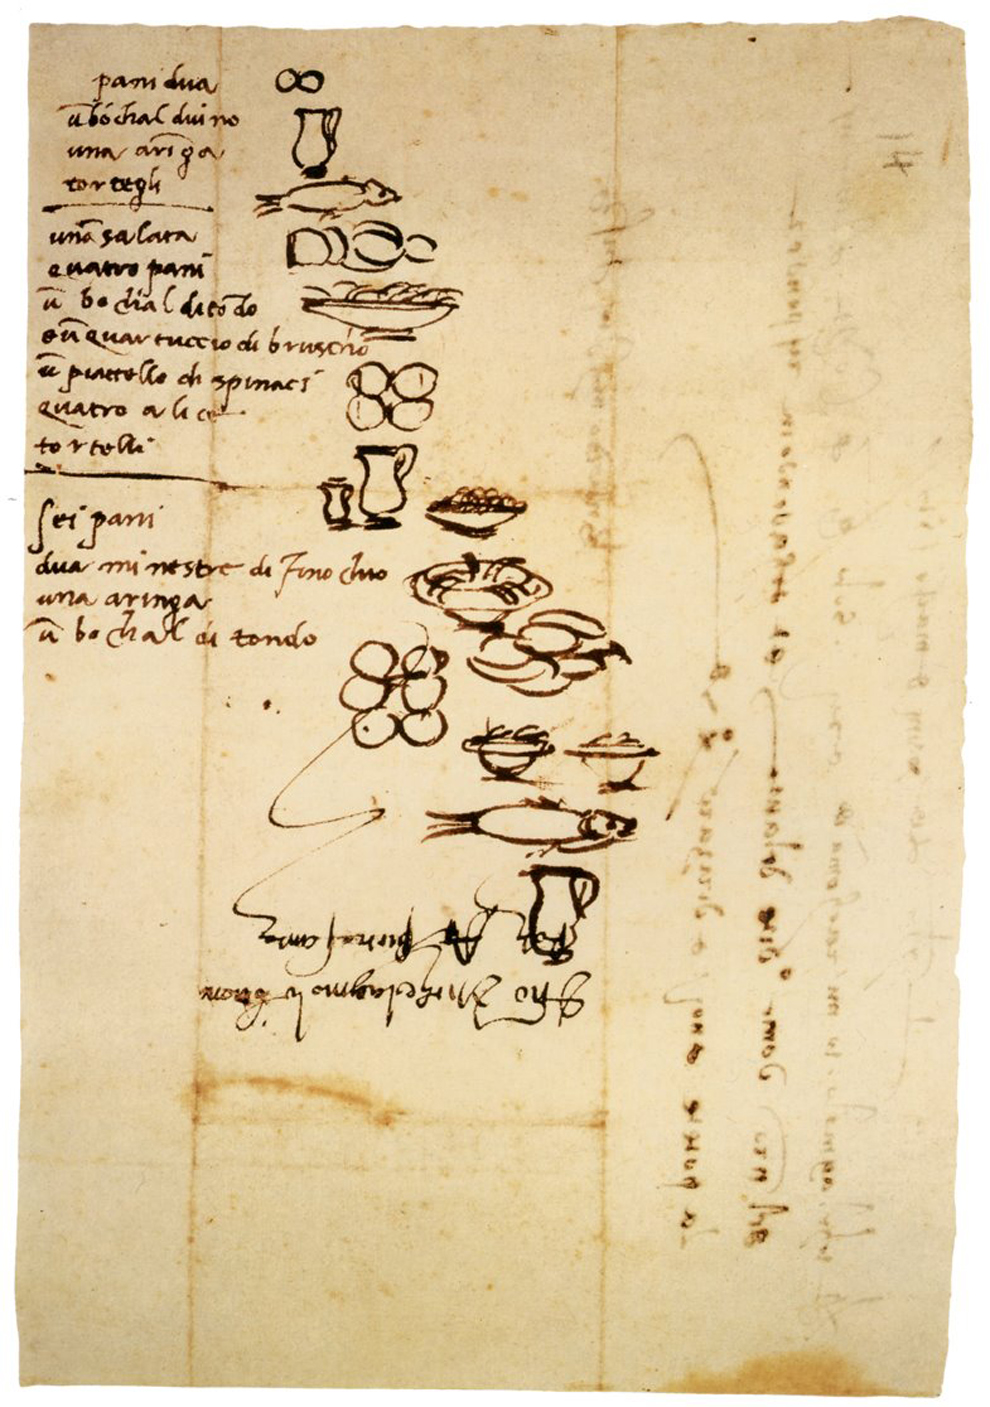 Michelangelo illustrated his grocery lists so that his illiterate servants would know what to buy him